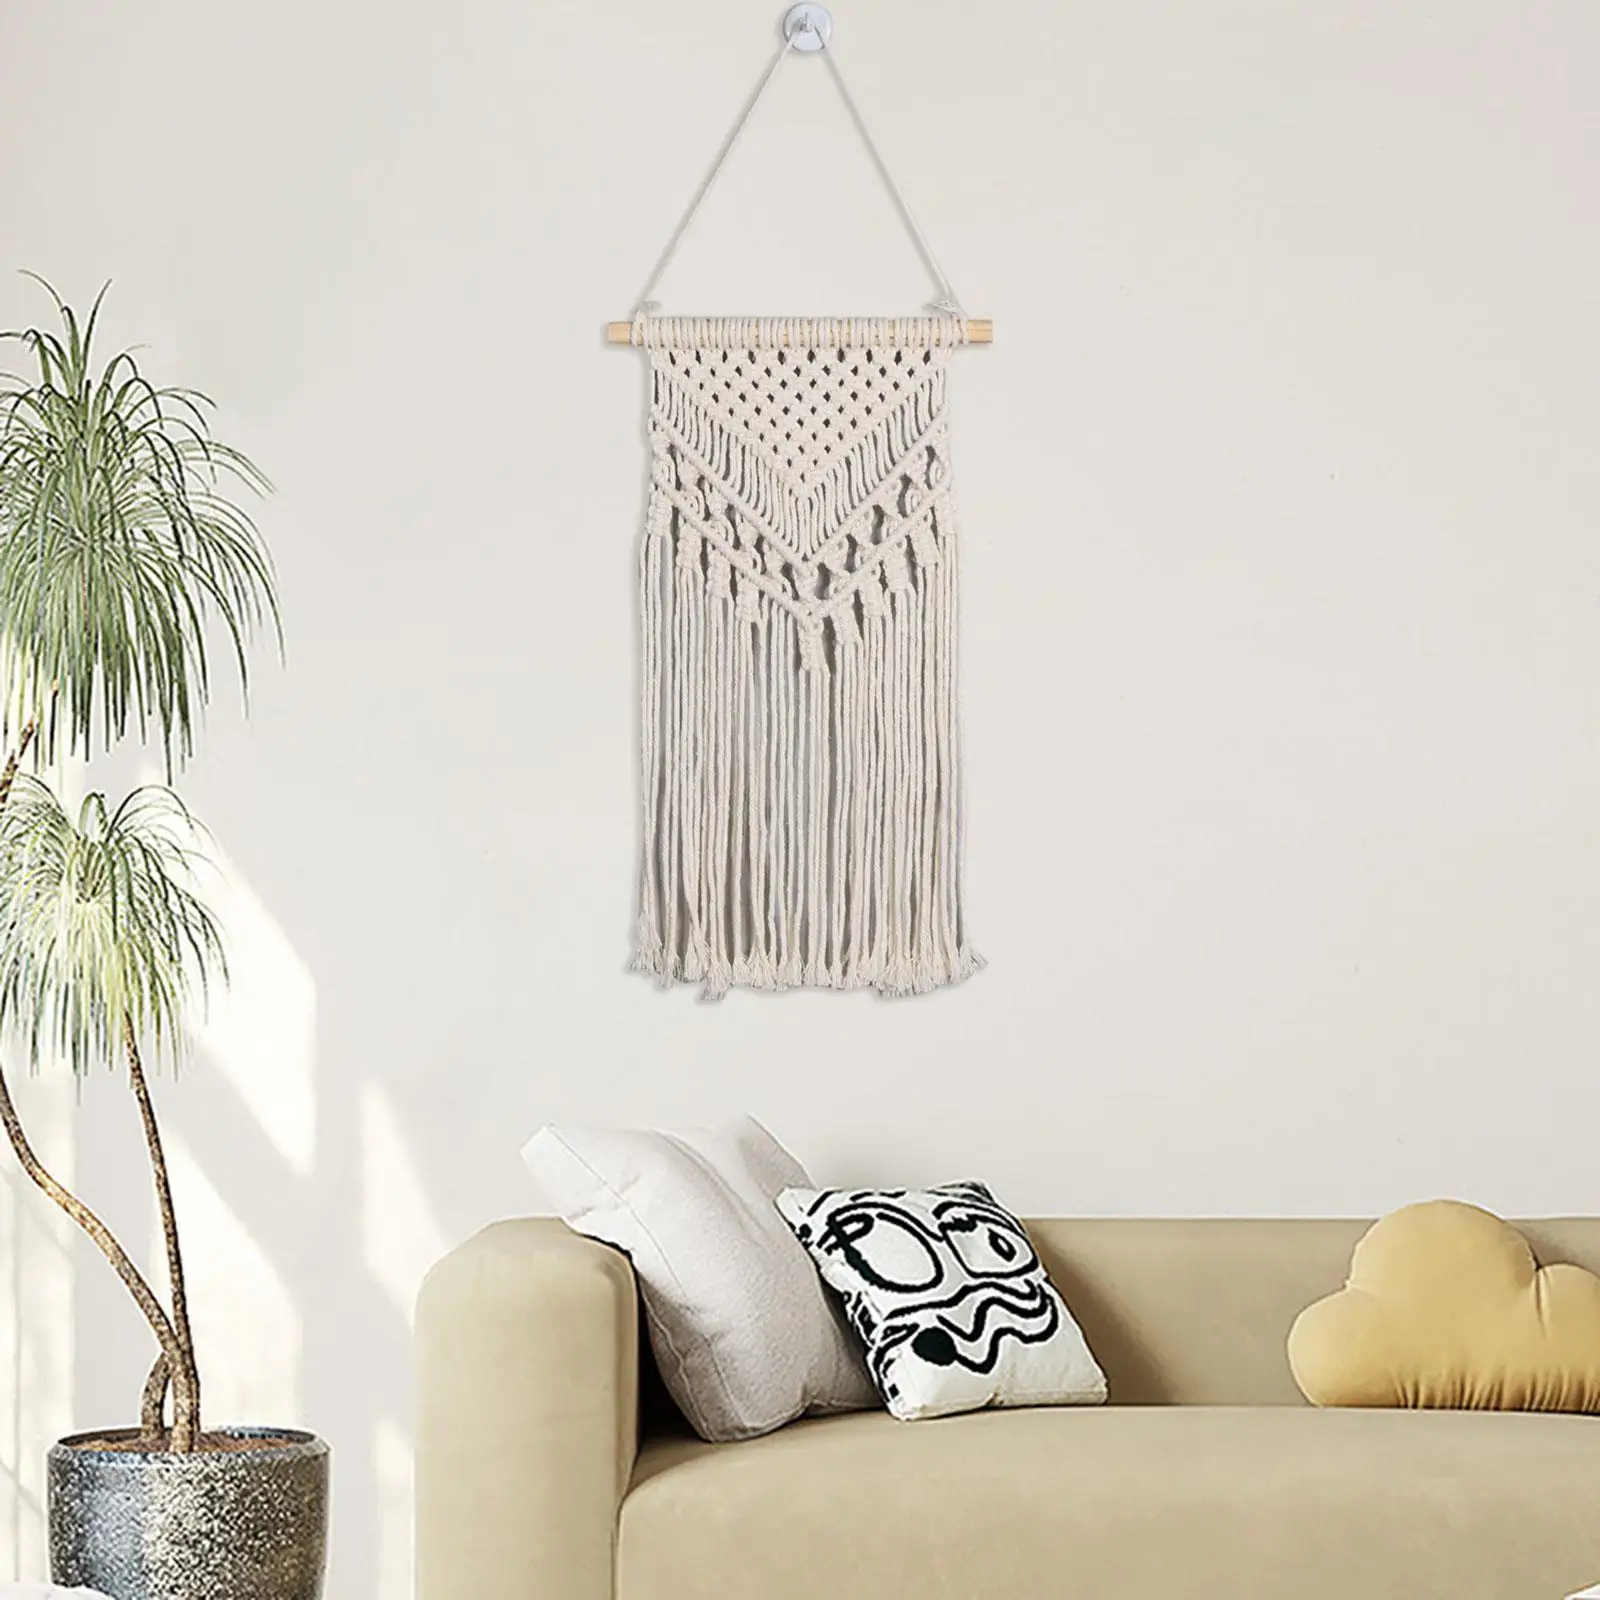 Macrame Wall Hanging Decor Wood Bohemian Style Tassel Woven Wall Art Decor Macrame Tapestry for Party Apartment Living Room Home